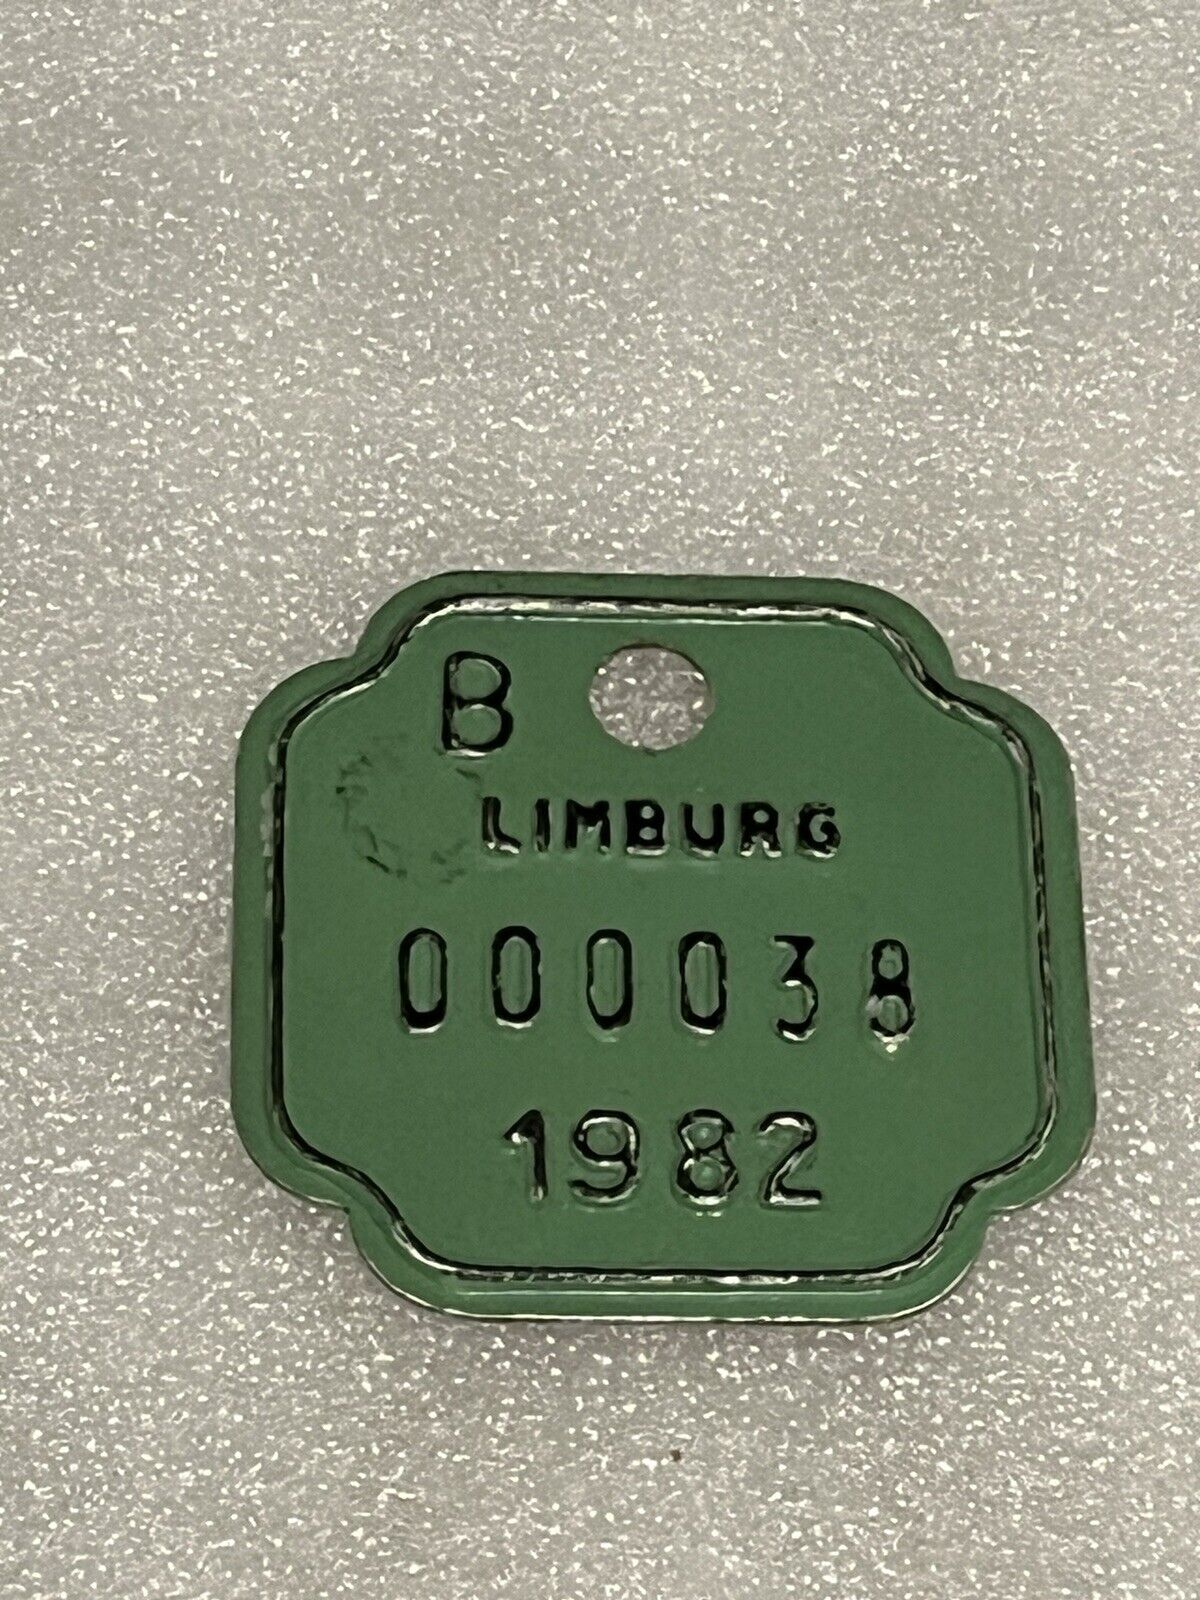 Limburg Vintage Bicycle Licence Plate- Green- 1982